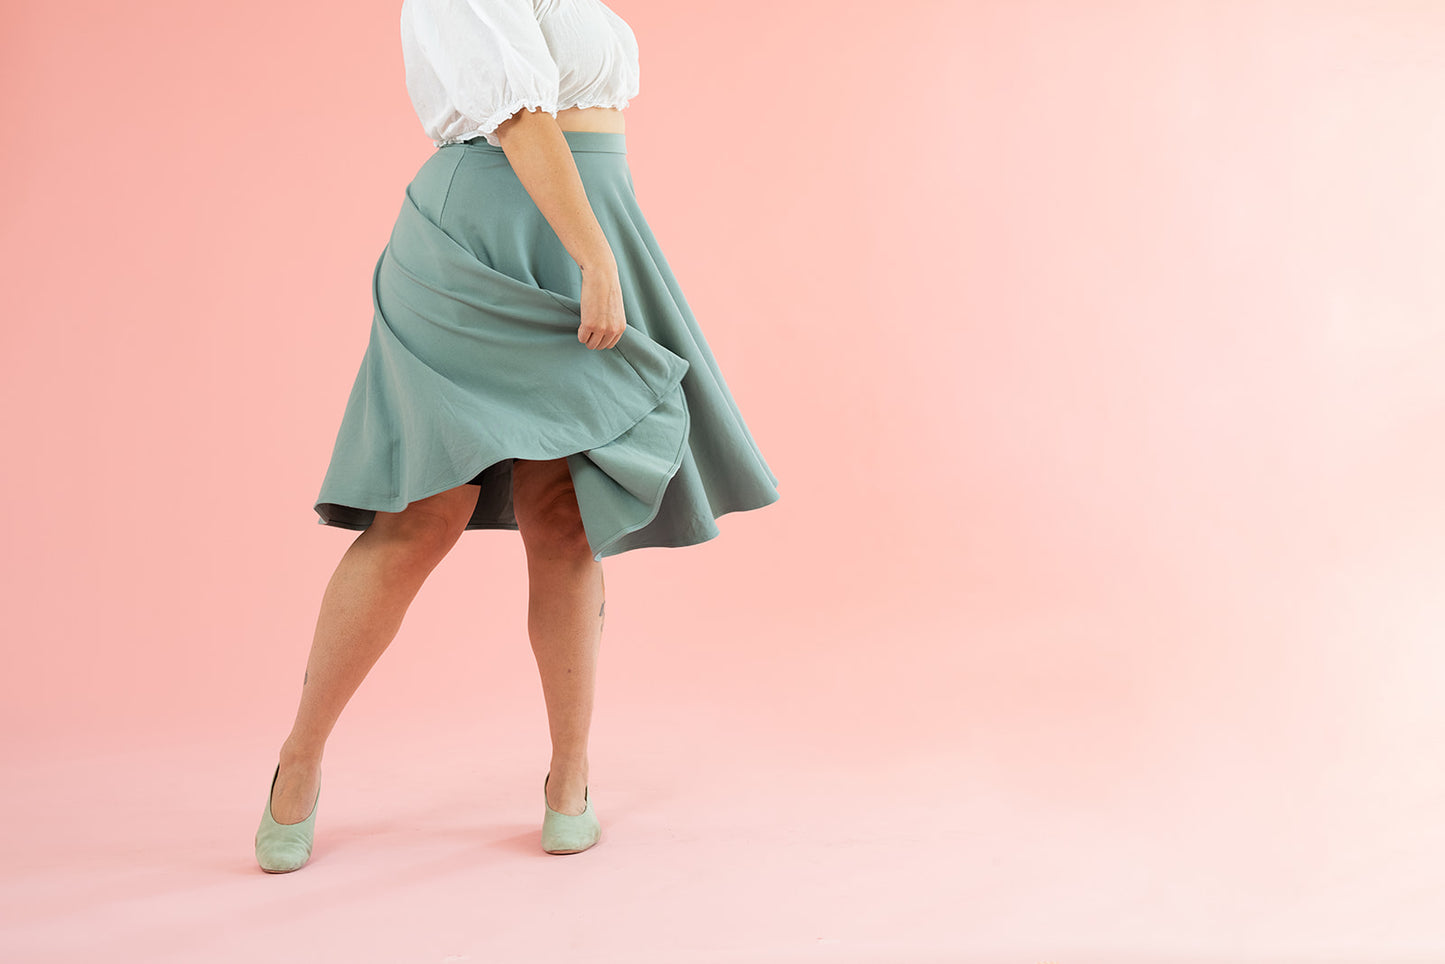 A woman in a white top twirls her flowy vintage-inspired mint skirt.